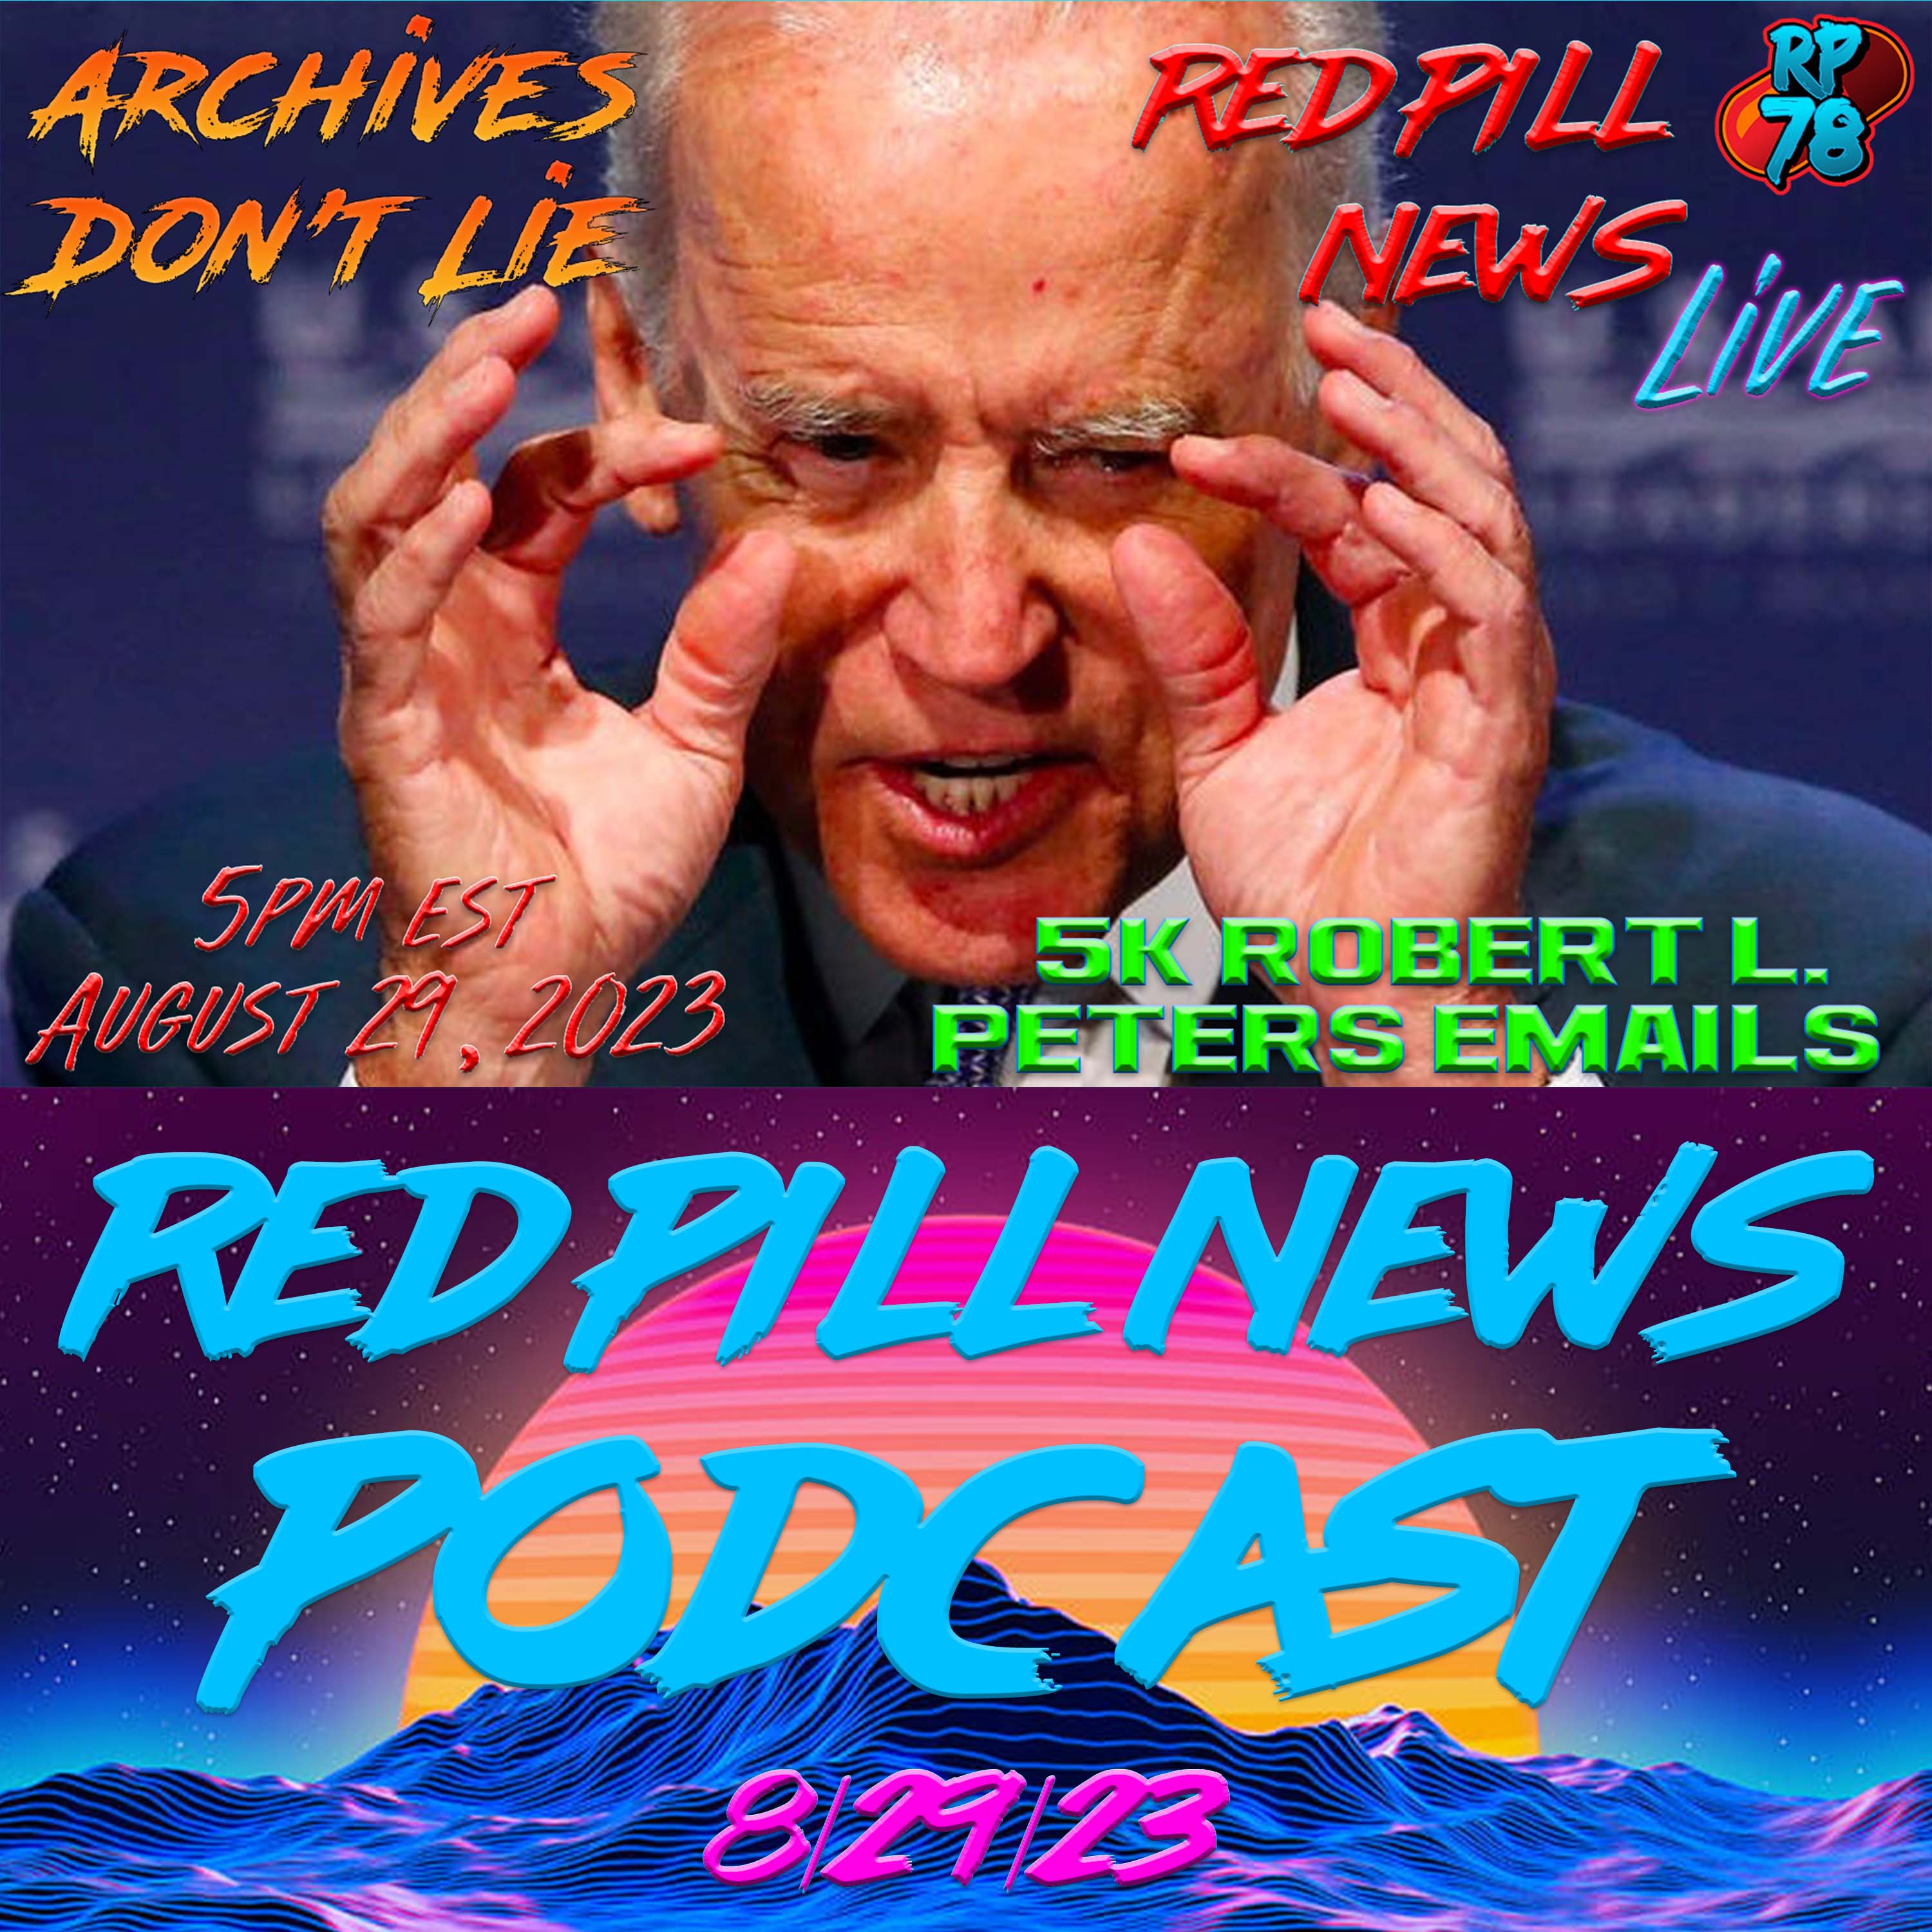 Robert L. Peters Comms Confirmed by National Archives on Red Pill News